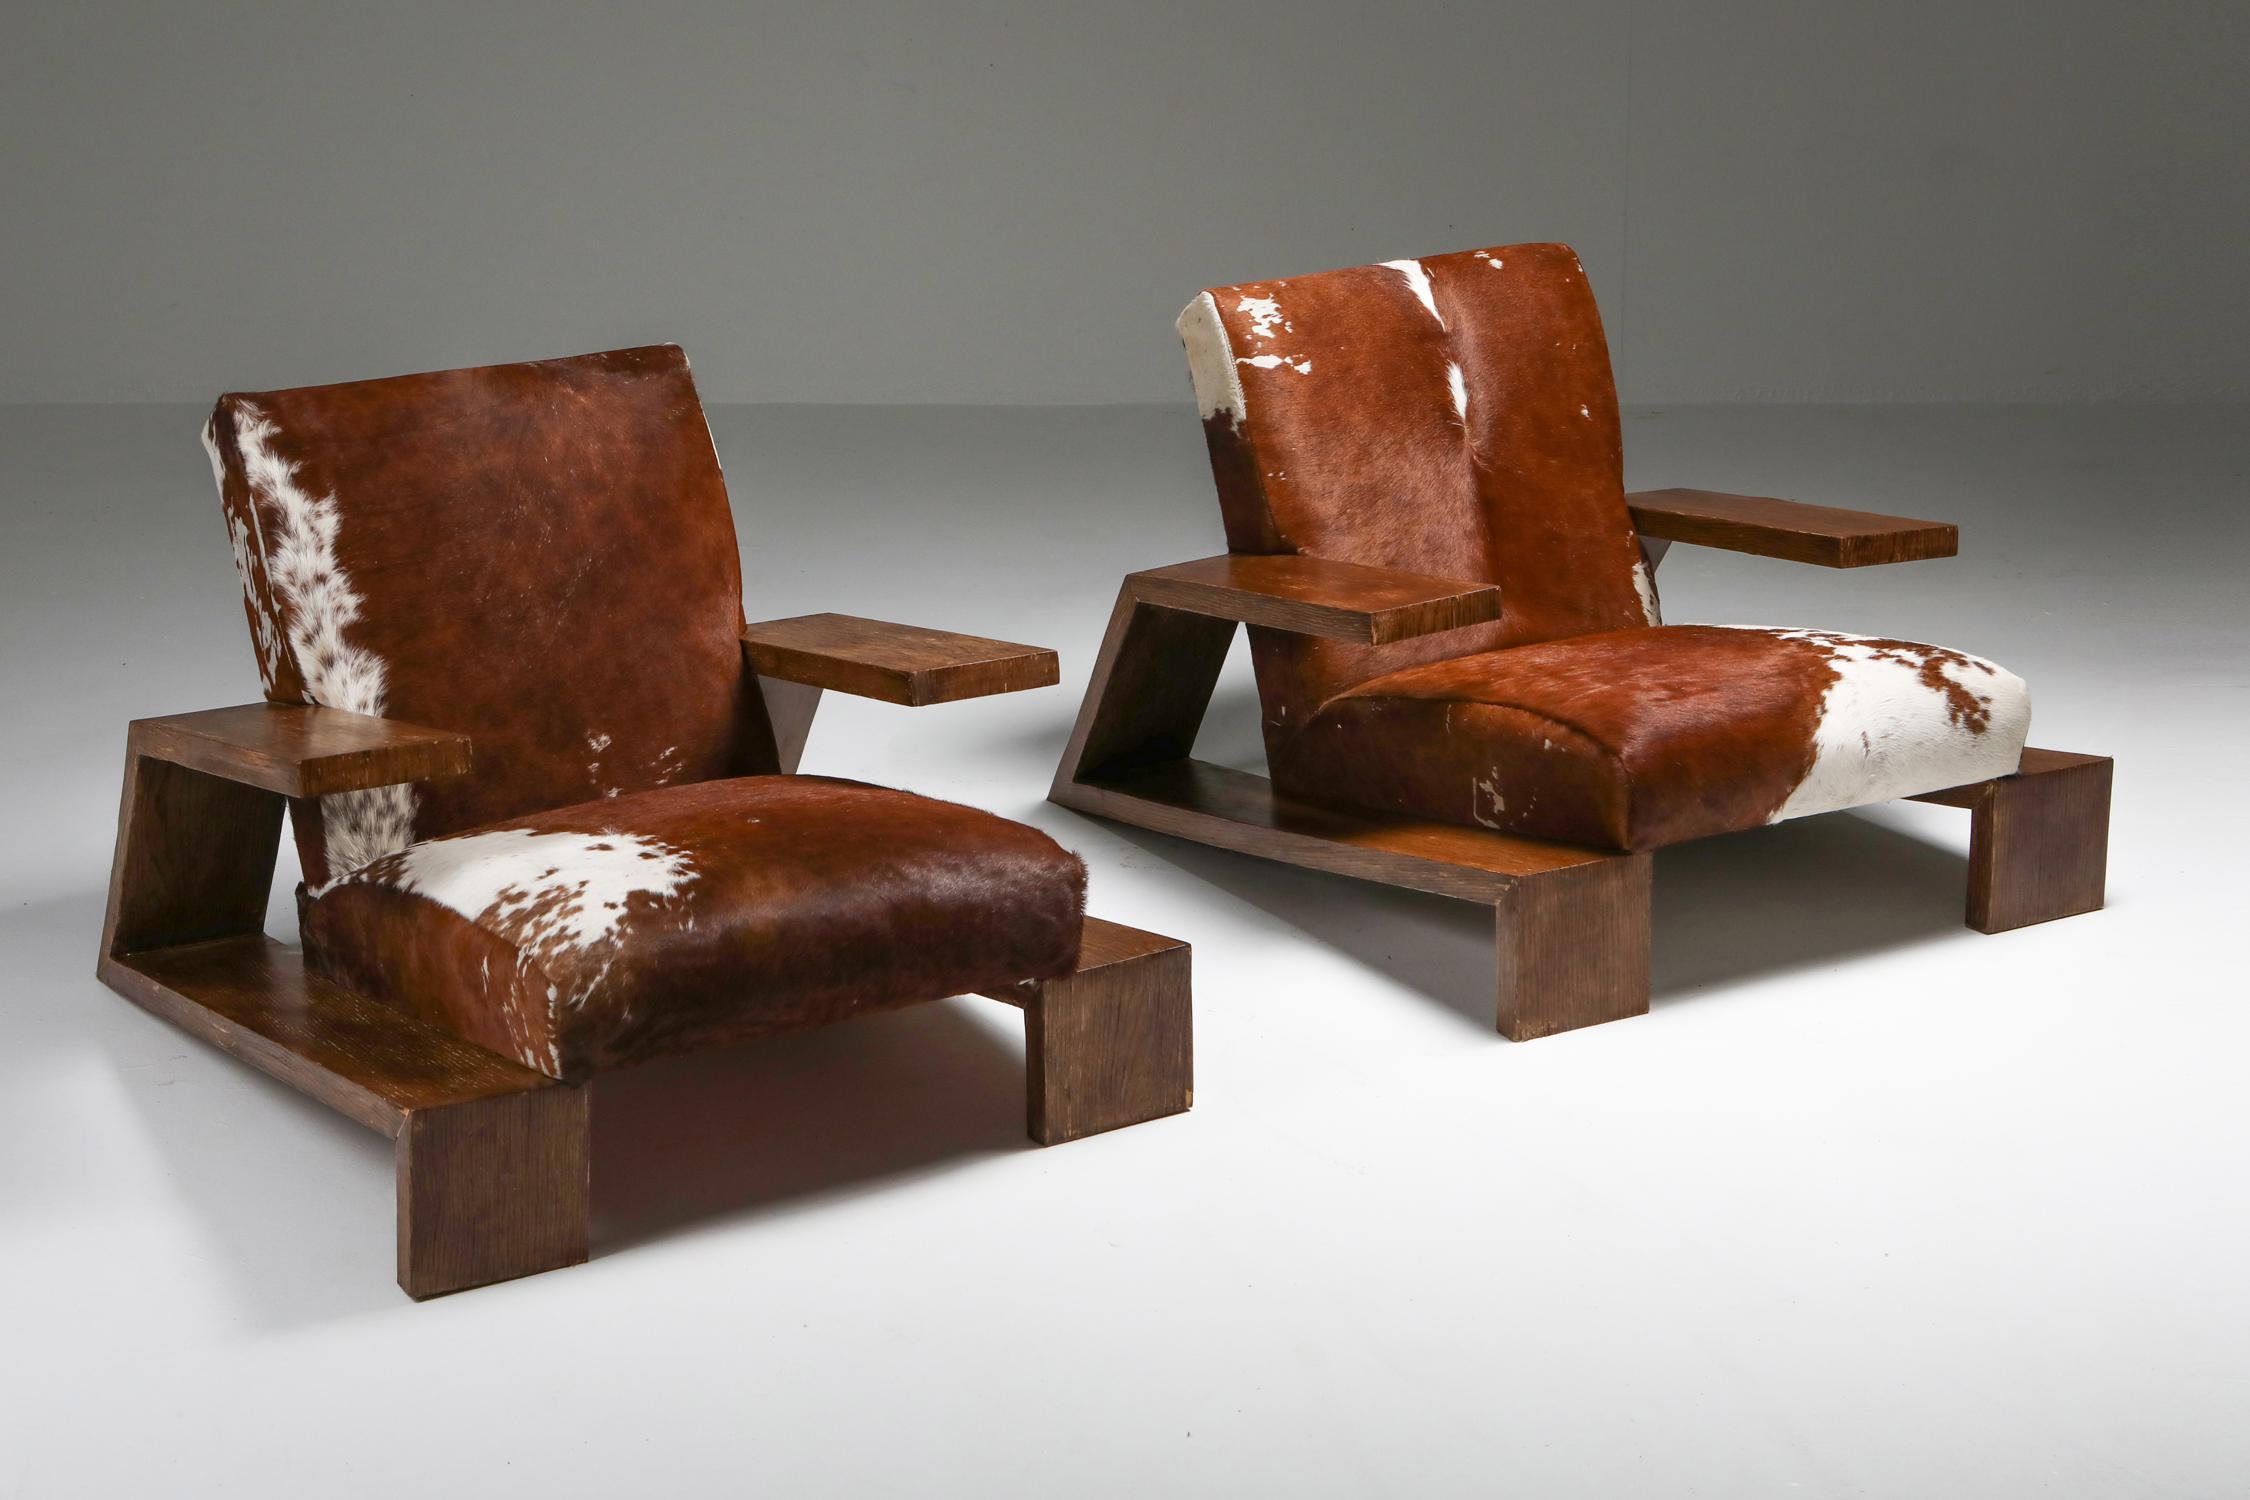 Jean Michel Frank attributed, by Comte, Bariloche, elephant chairs, 1939

The present chairs were produced by Comte, the Argentinean furniture maker and retailer, after an earlier model by French designer Jean-Michel Frank. Comte was established